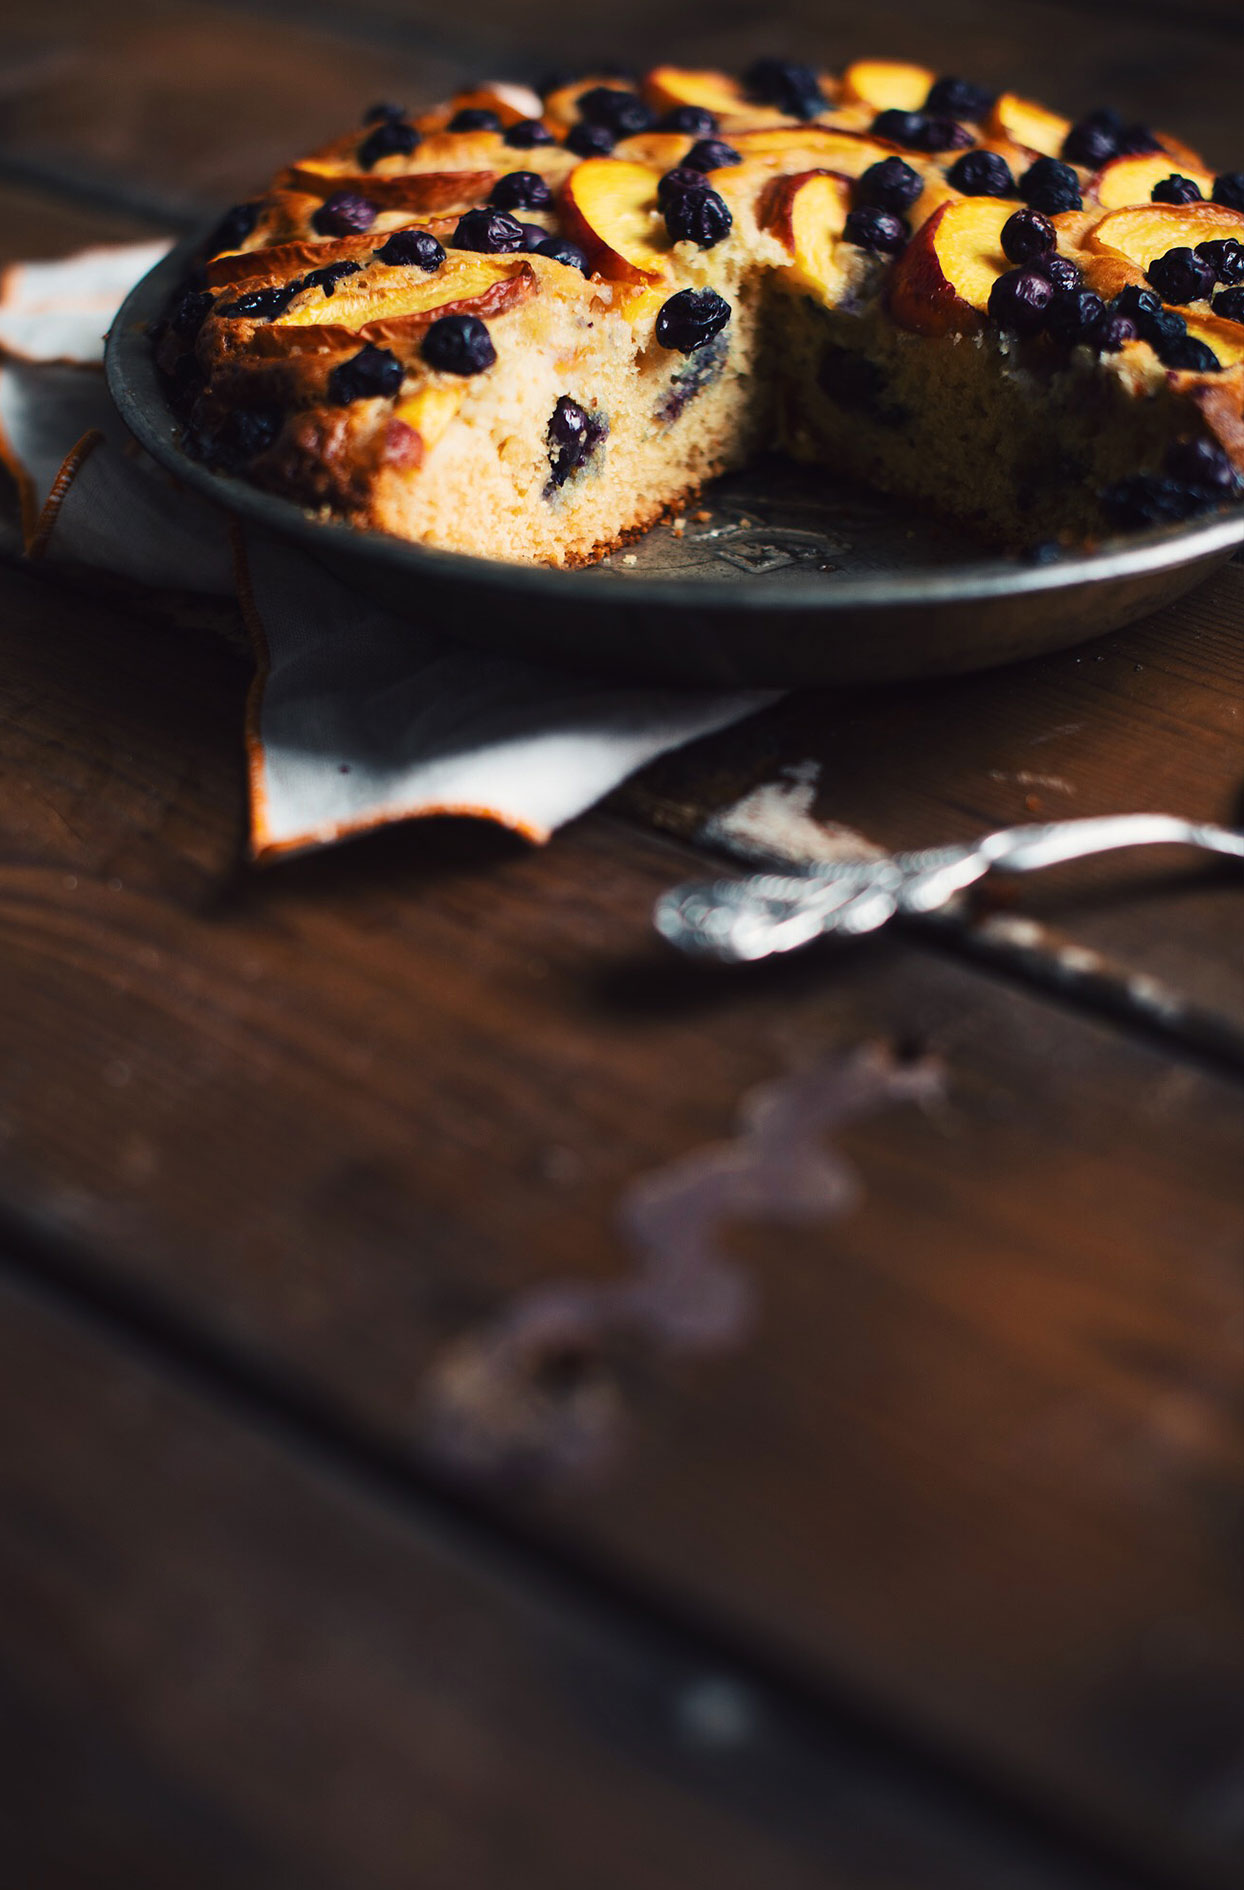 Blueberry cake with rum peaches